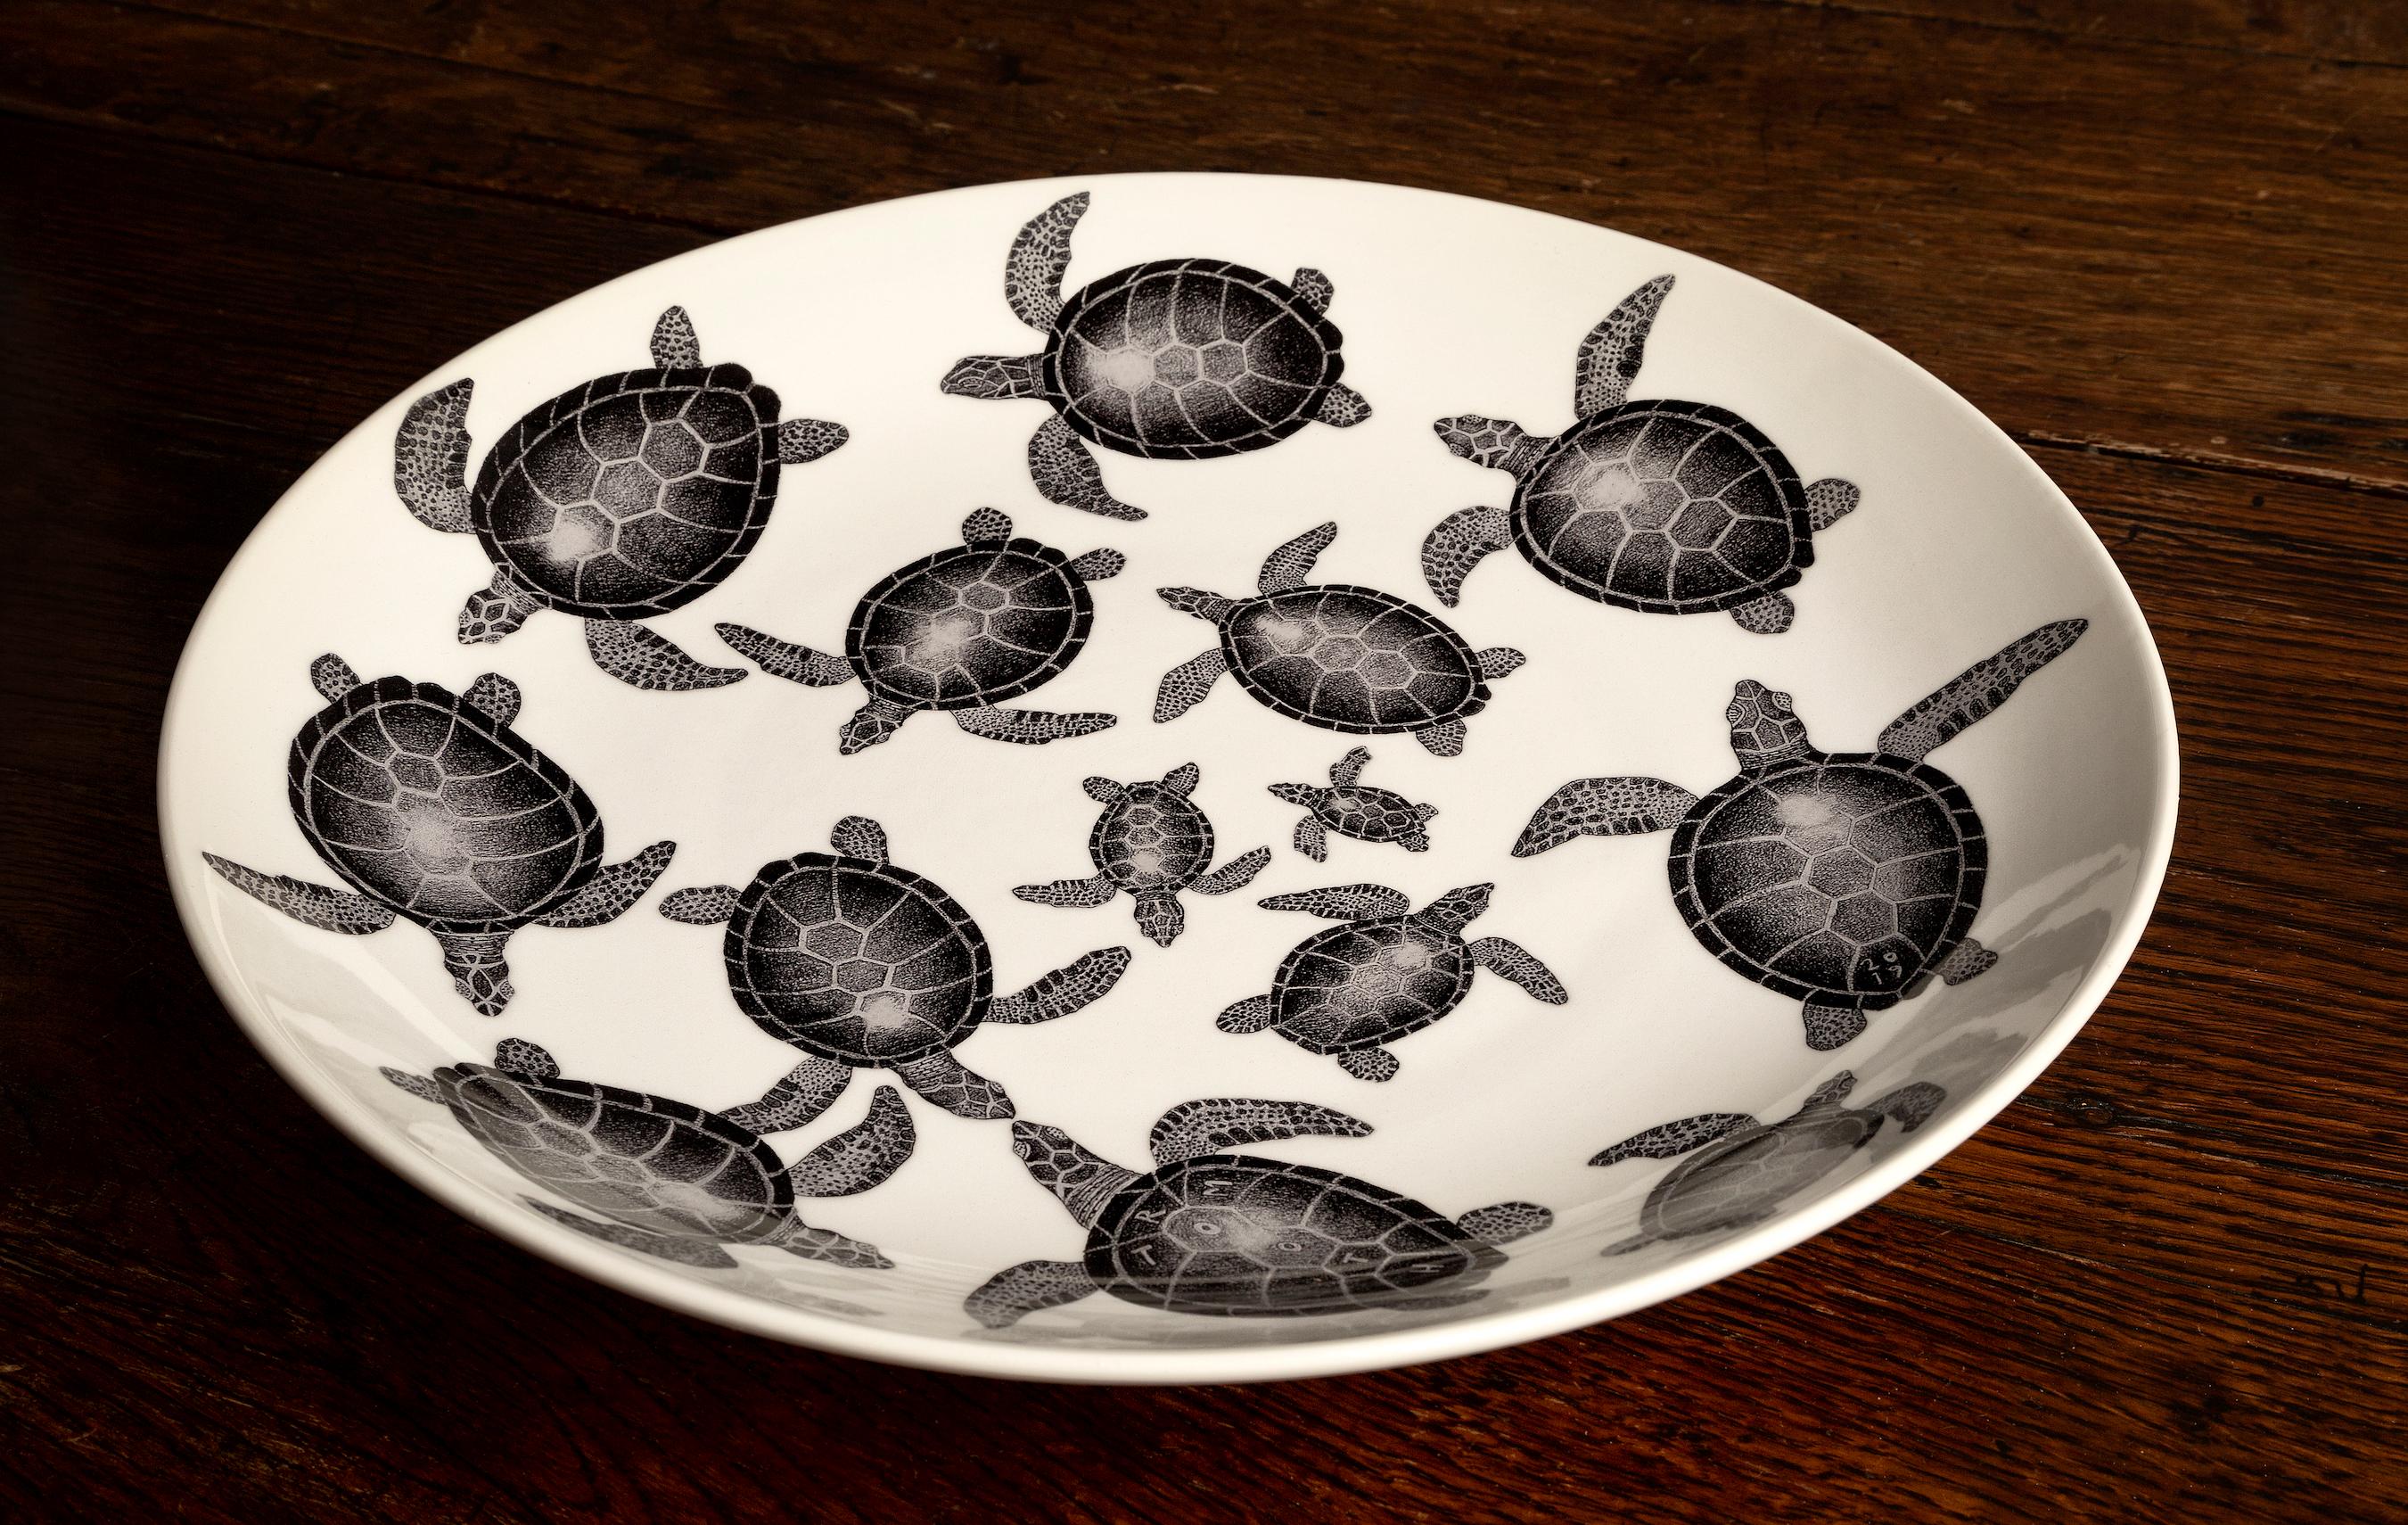 Turtle traffic - Realist Art by Tom Rooth